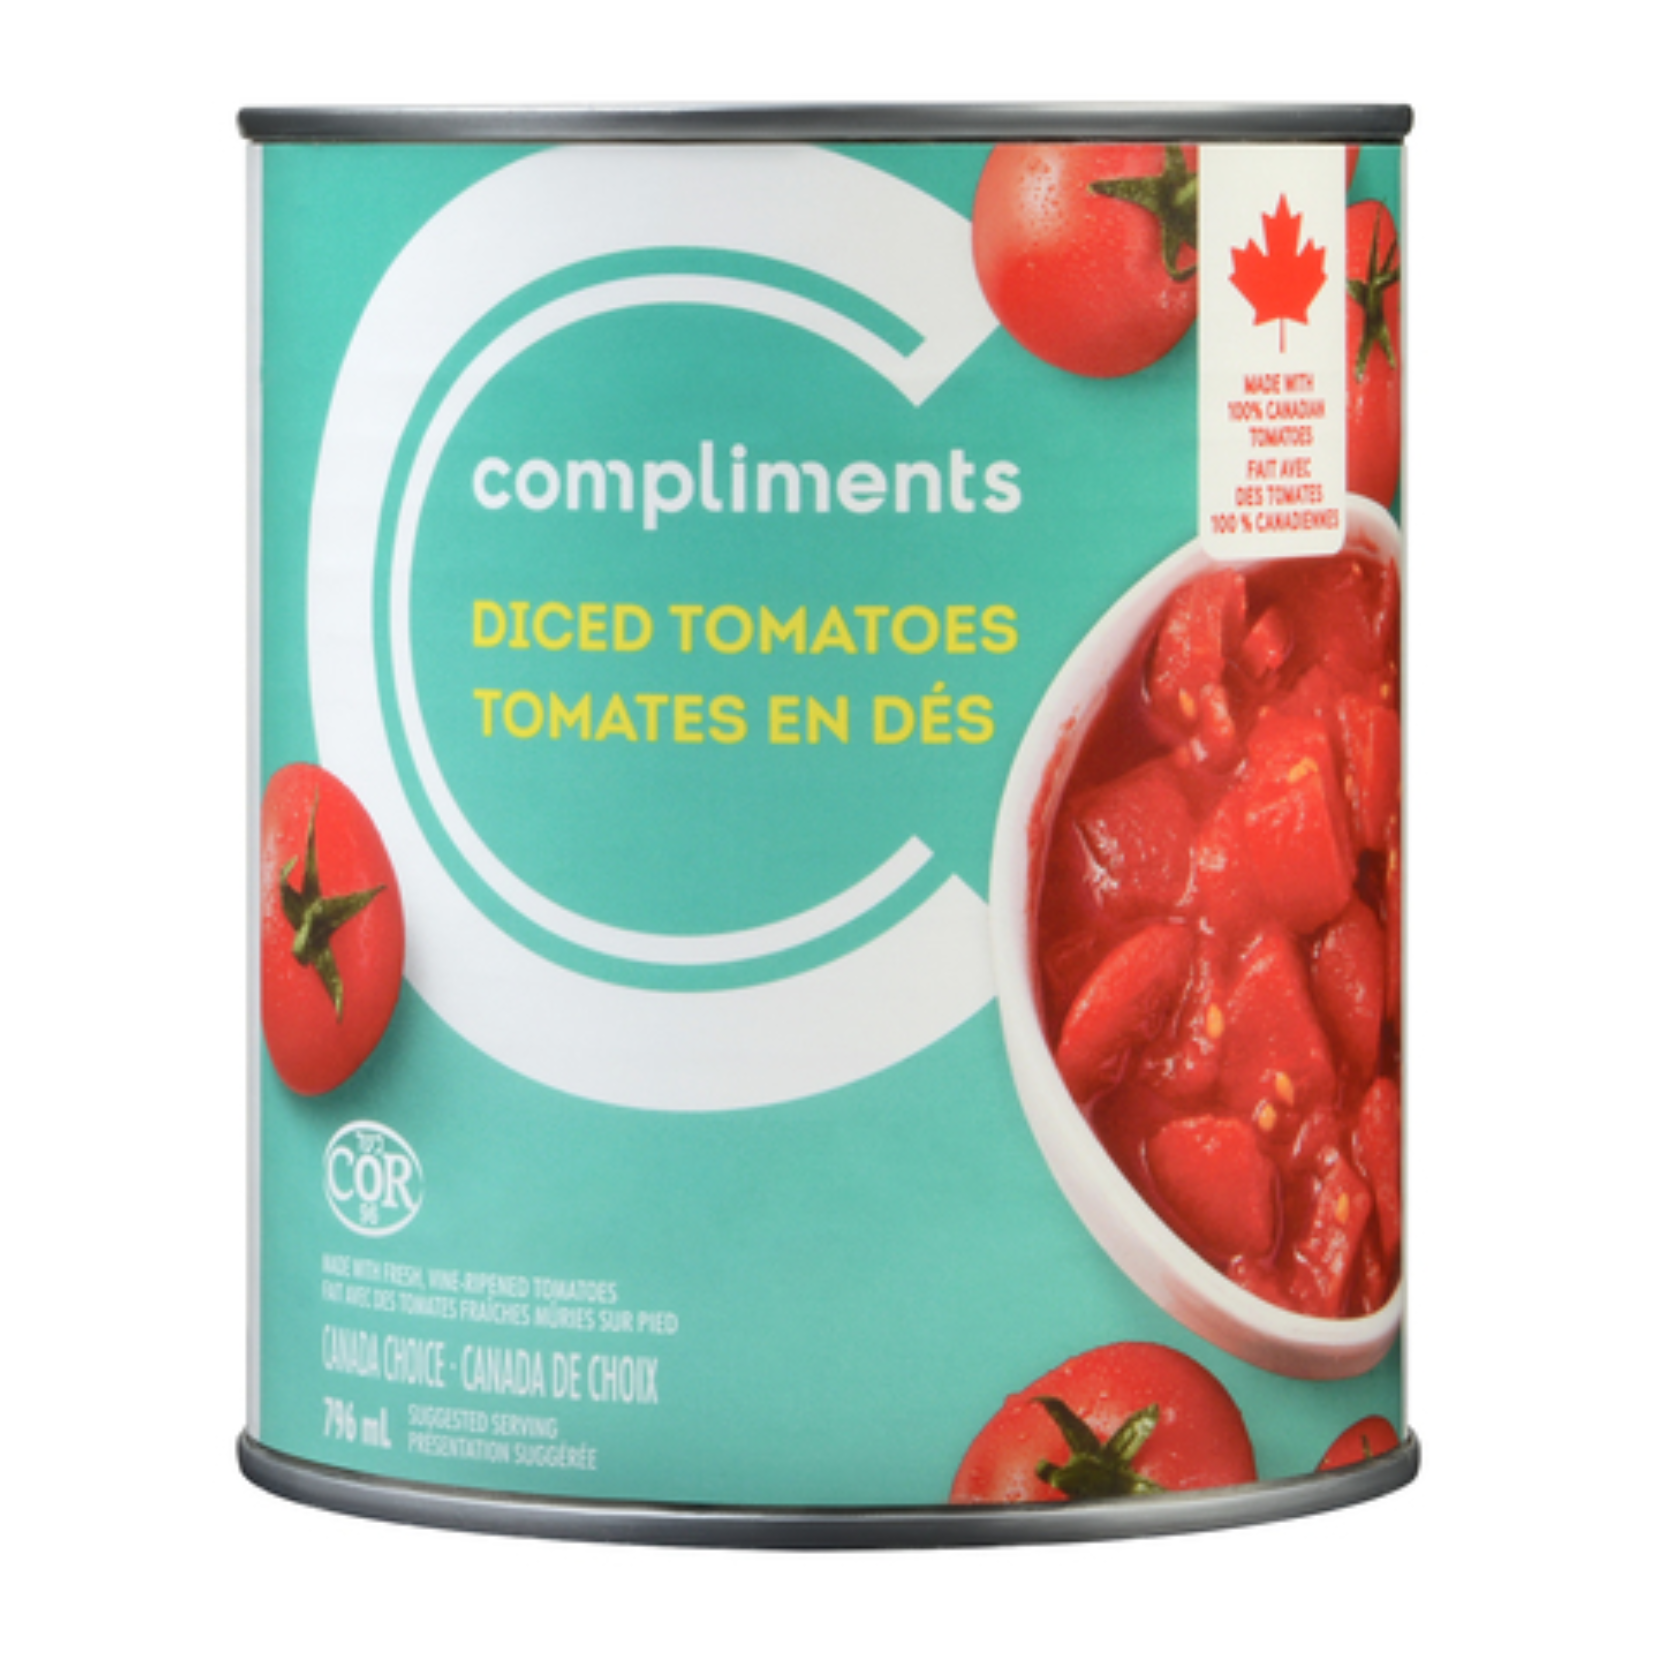 Compliments Diced Tomatoes 796ml